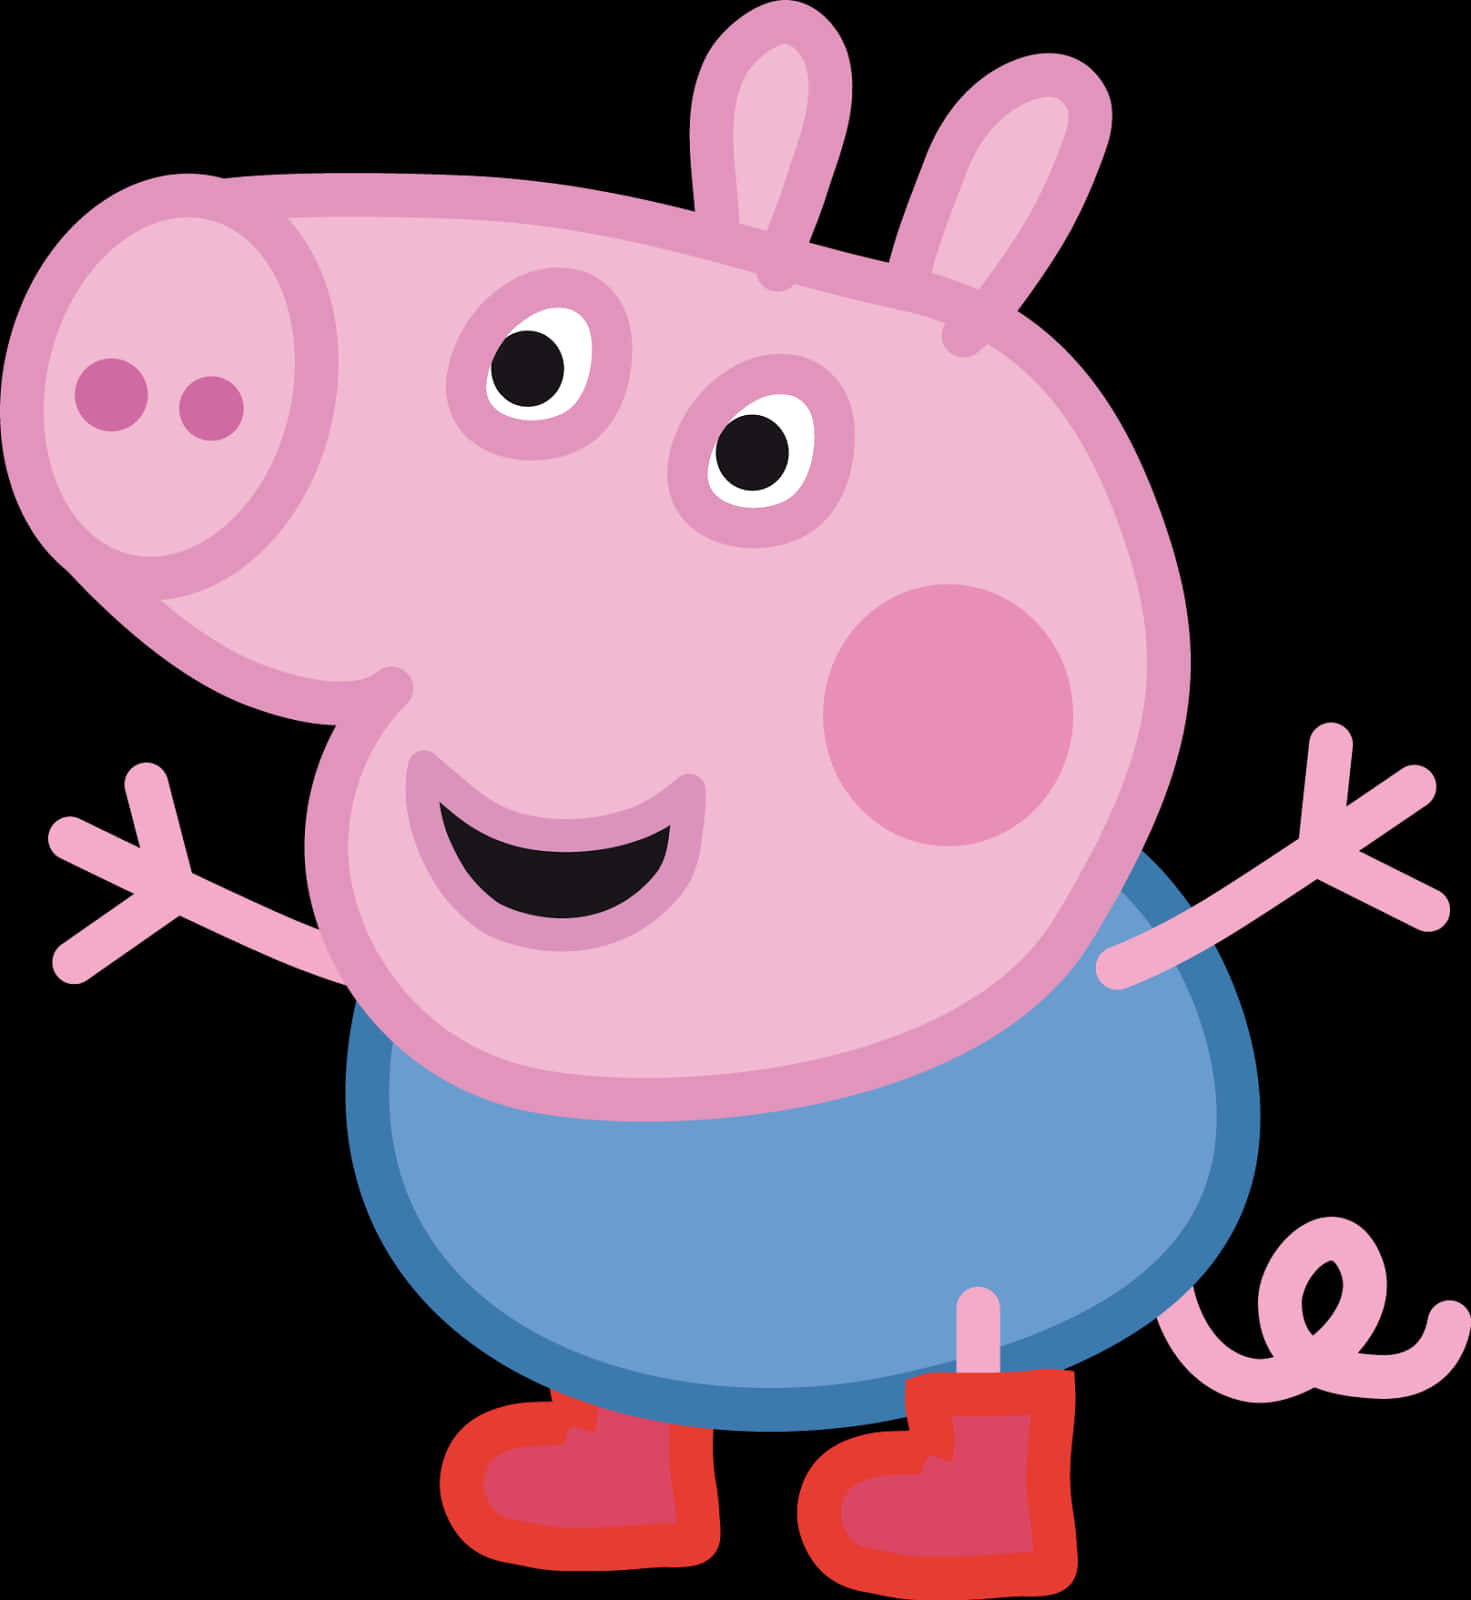 A Cartoon Pig With Red Shoes And Blue Pants PNG